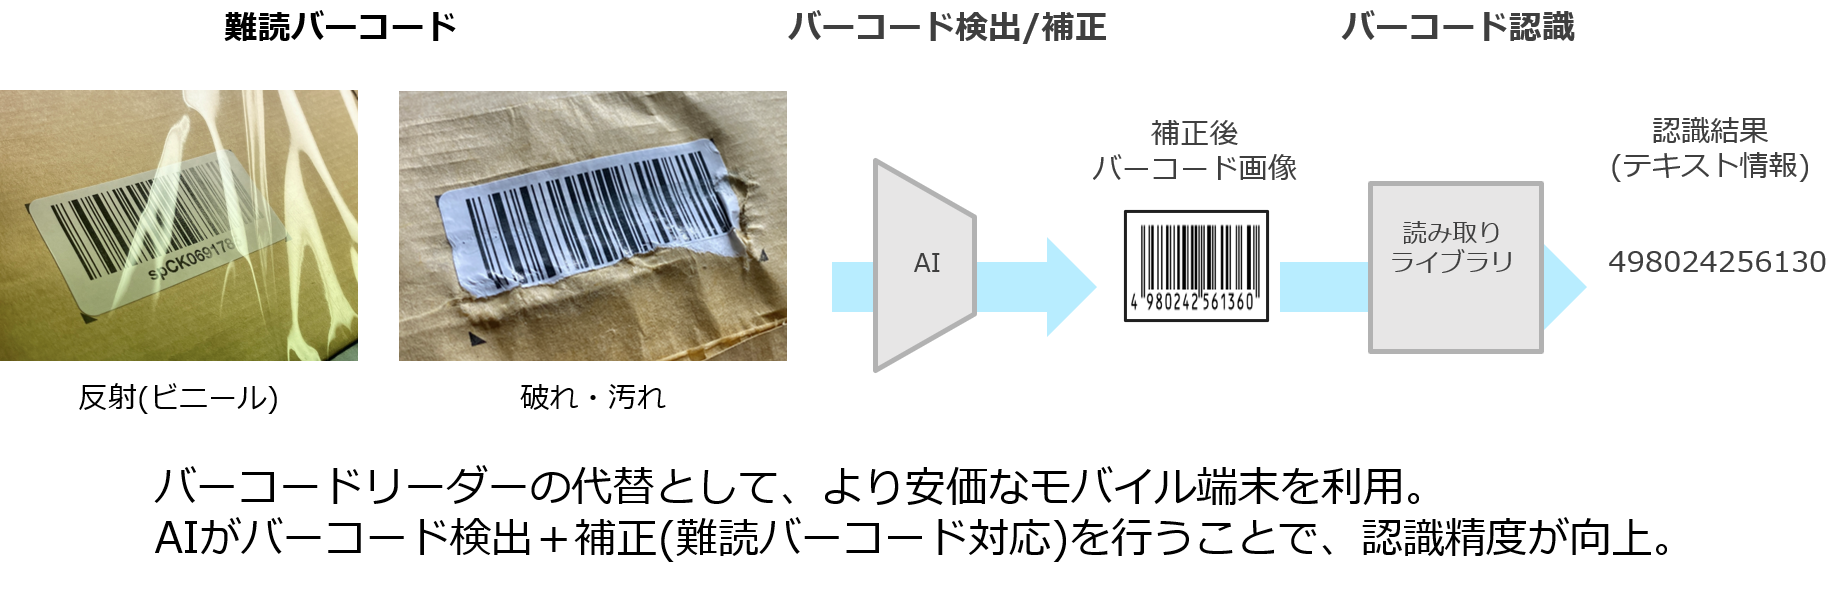 AI READING OF DIFFICULT-TO-READ BARCODES